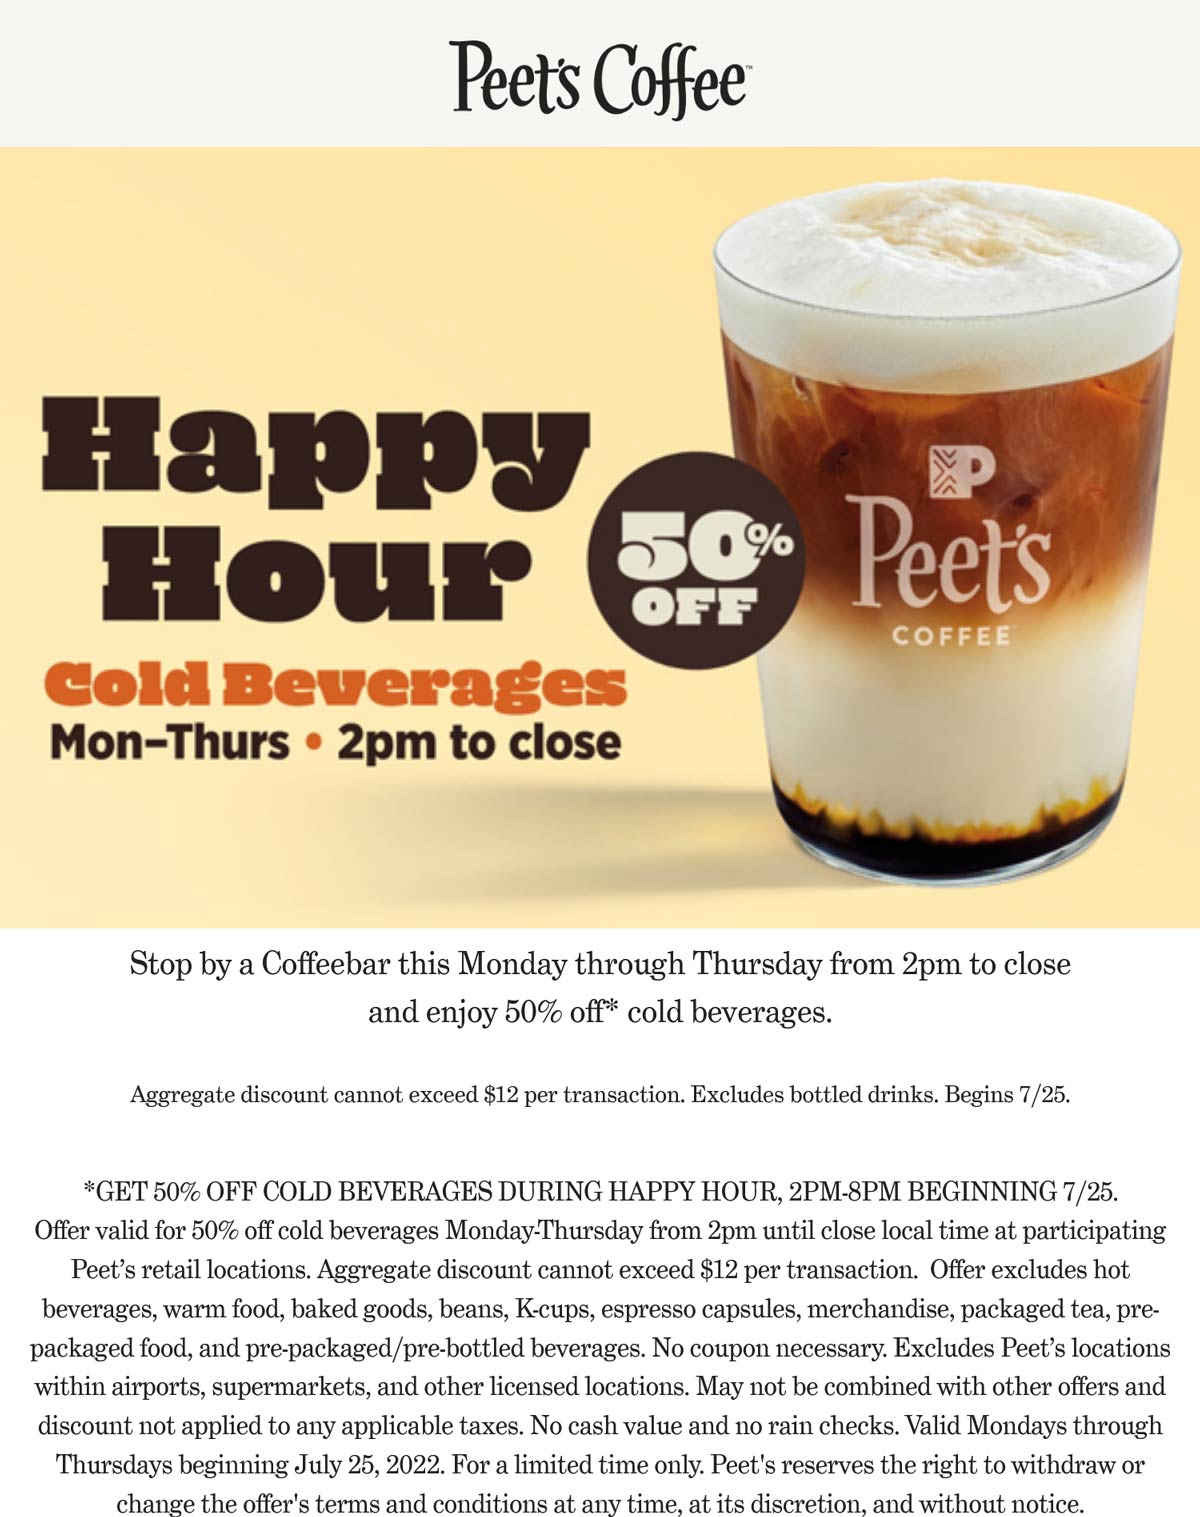 Peets Coffee restaurants Coupon  50% off cold drinks Mon-Thur after 2p at Peets Coffee #peetscoffee 